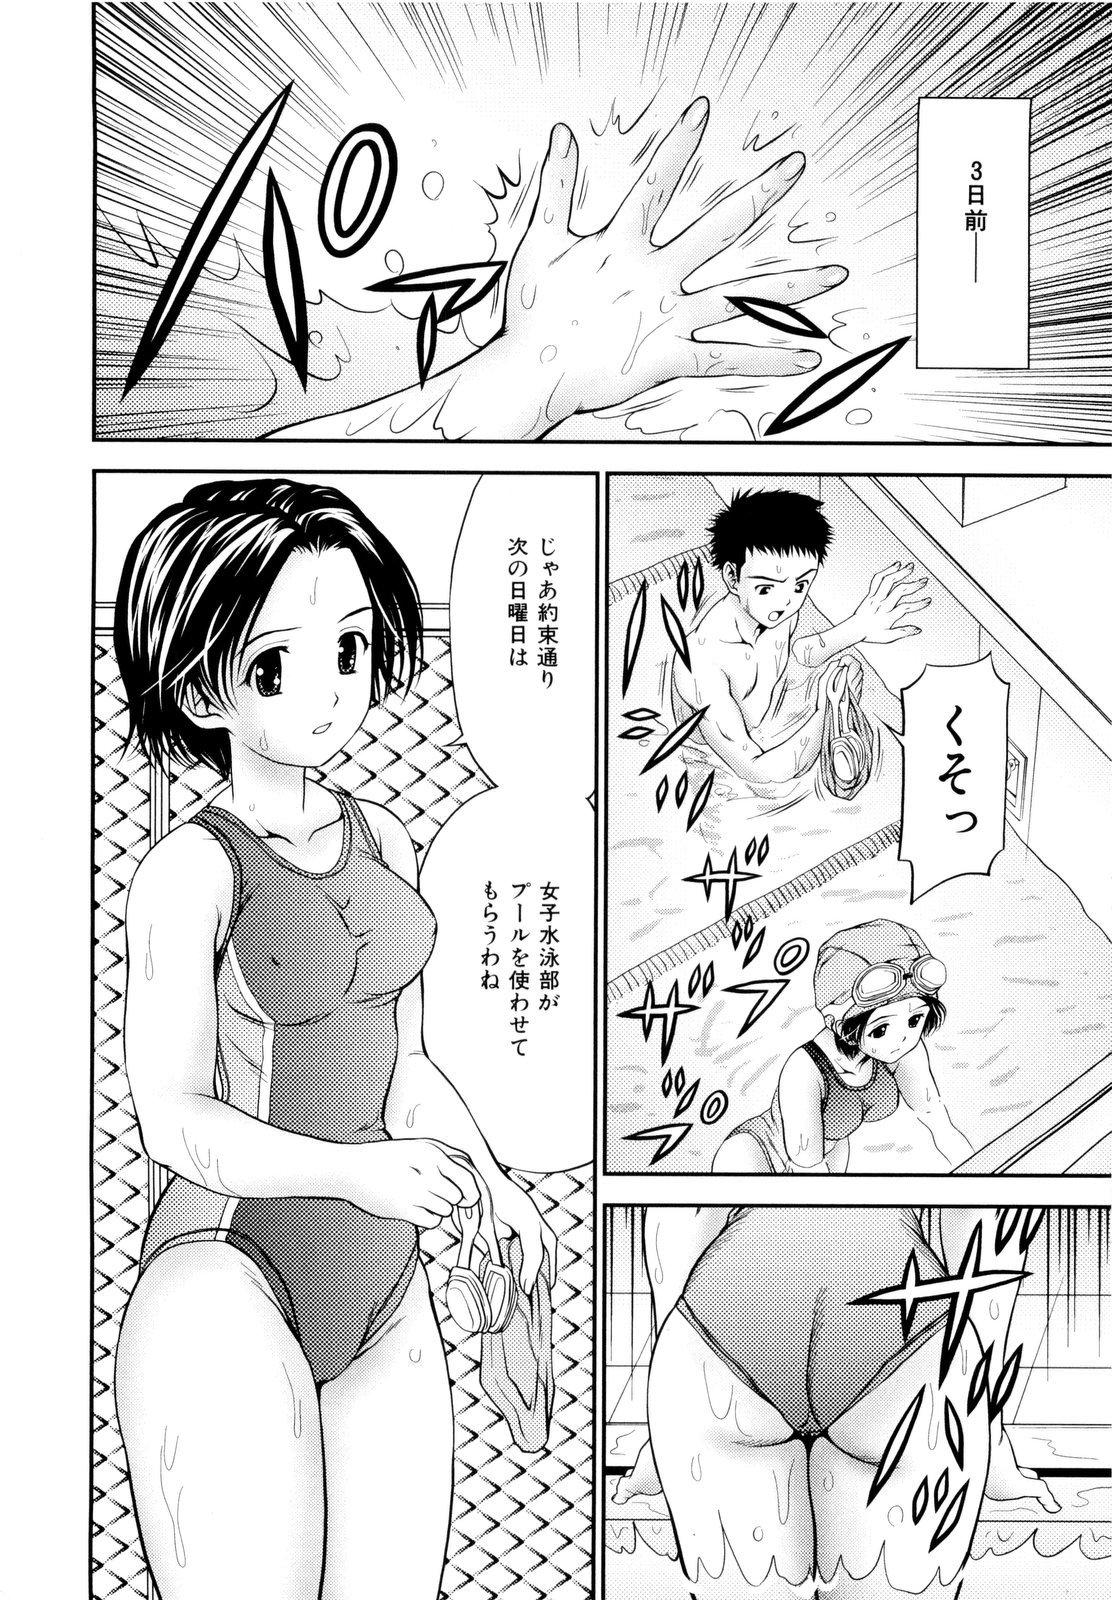 Topless Imouto Bloomer Blowjob Contest - Page 11